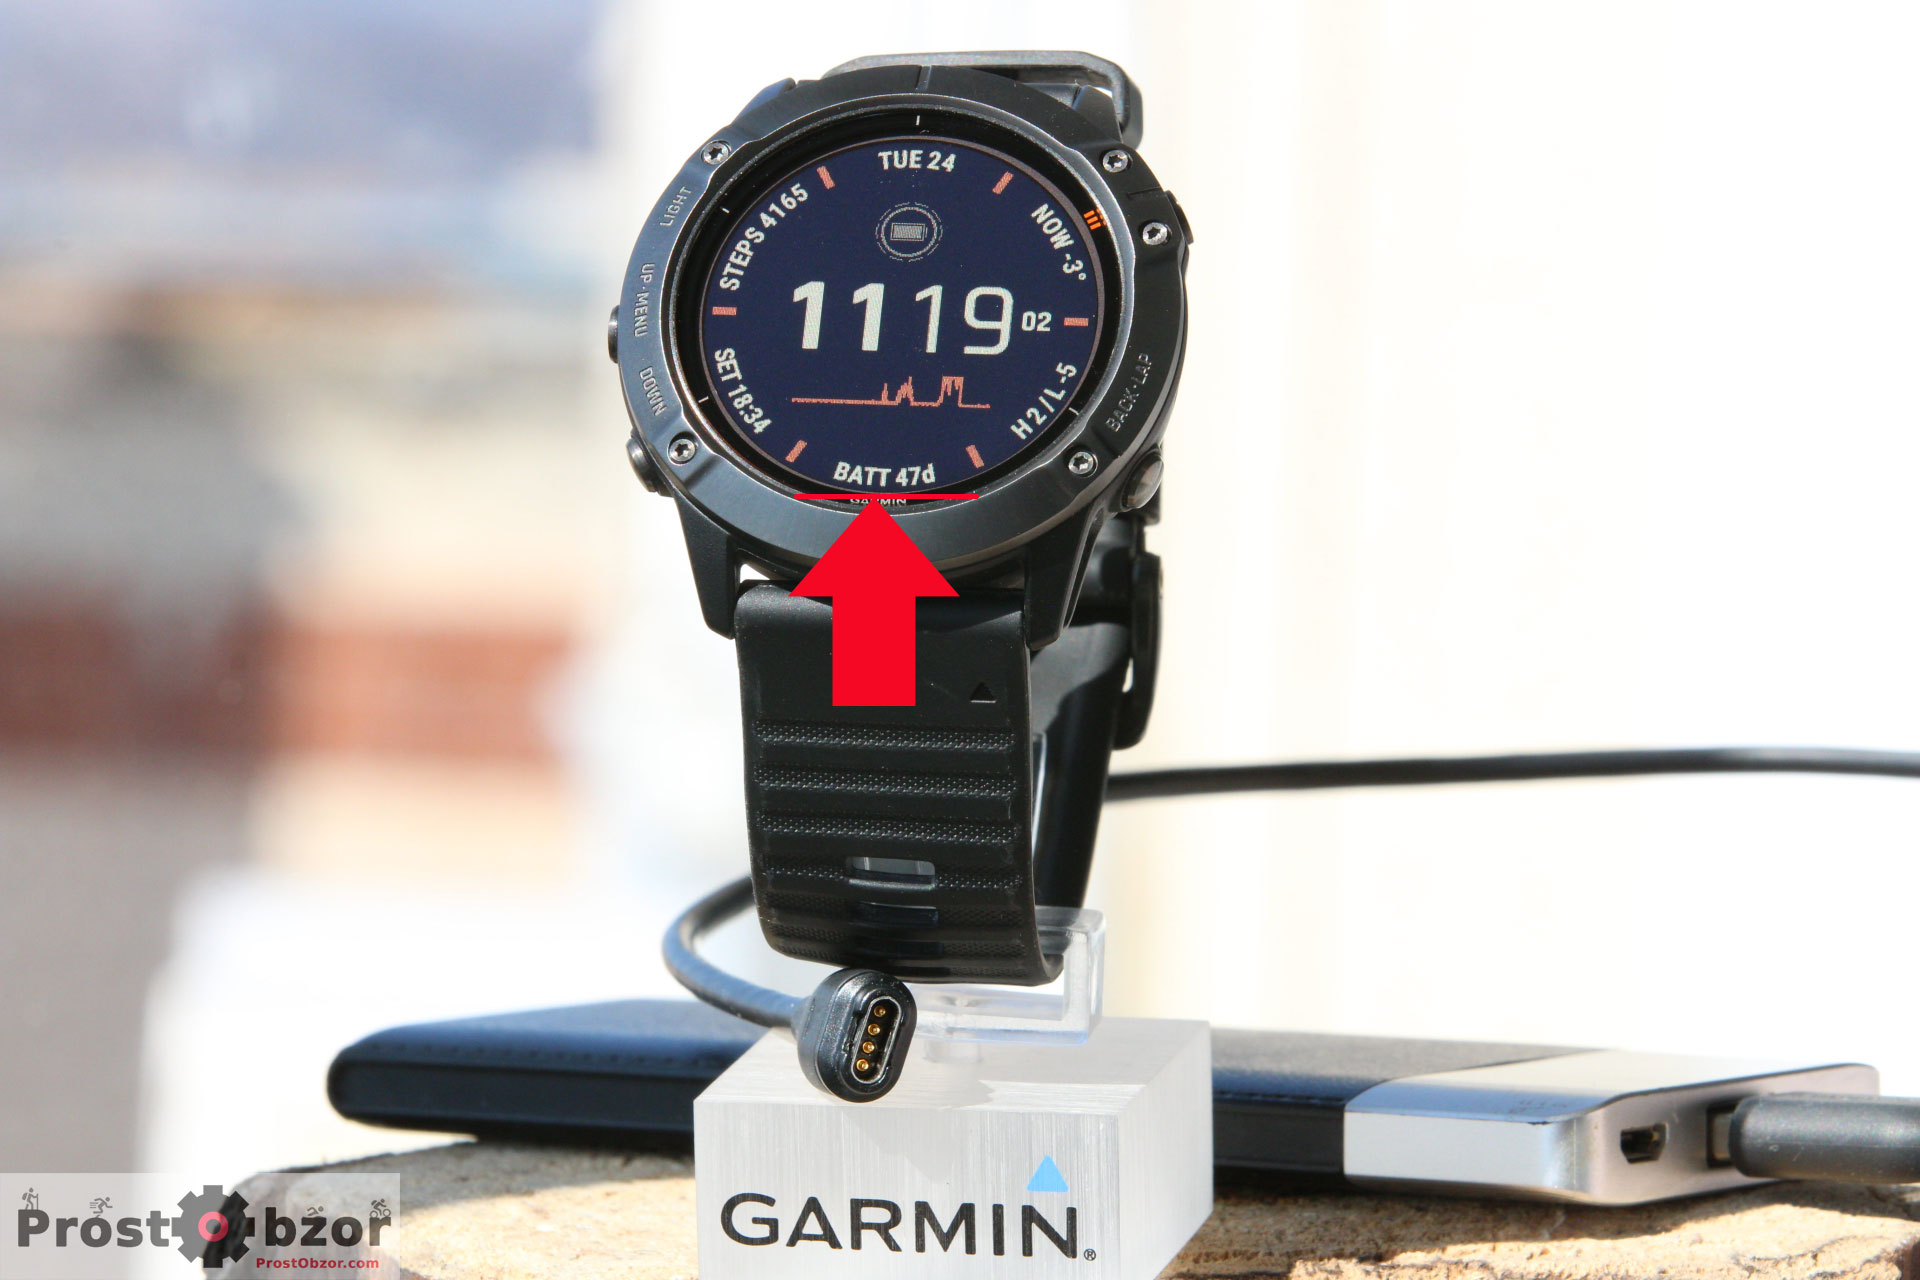 serie Invitere betalingsmiddel Garmin Fenix 6X Pro Solar comparison and test in the detailed review